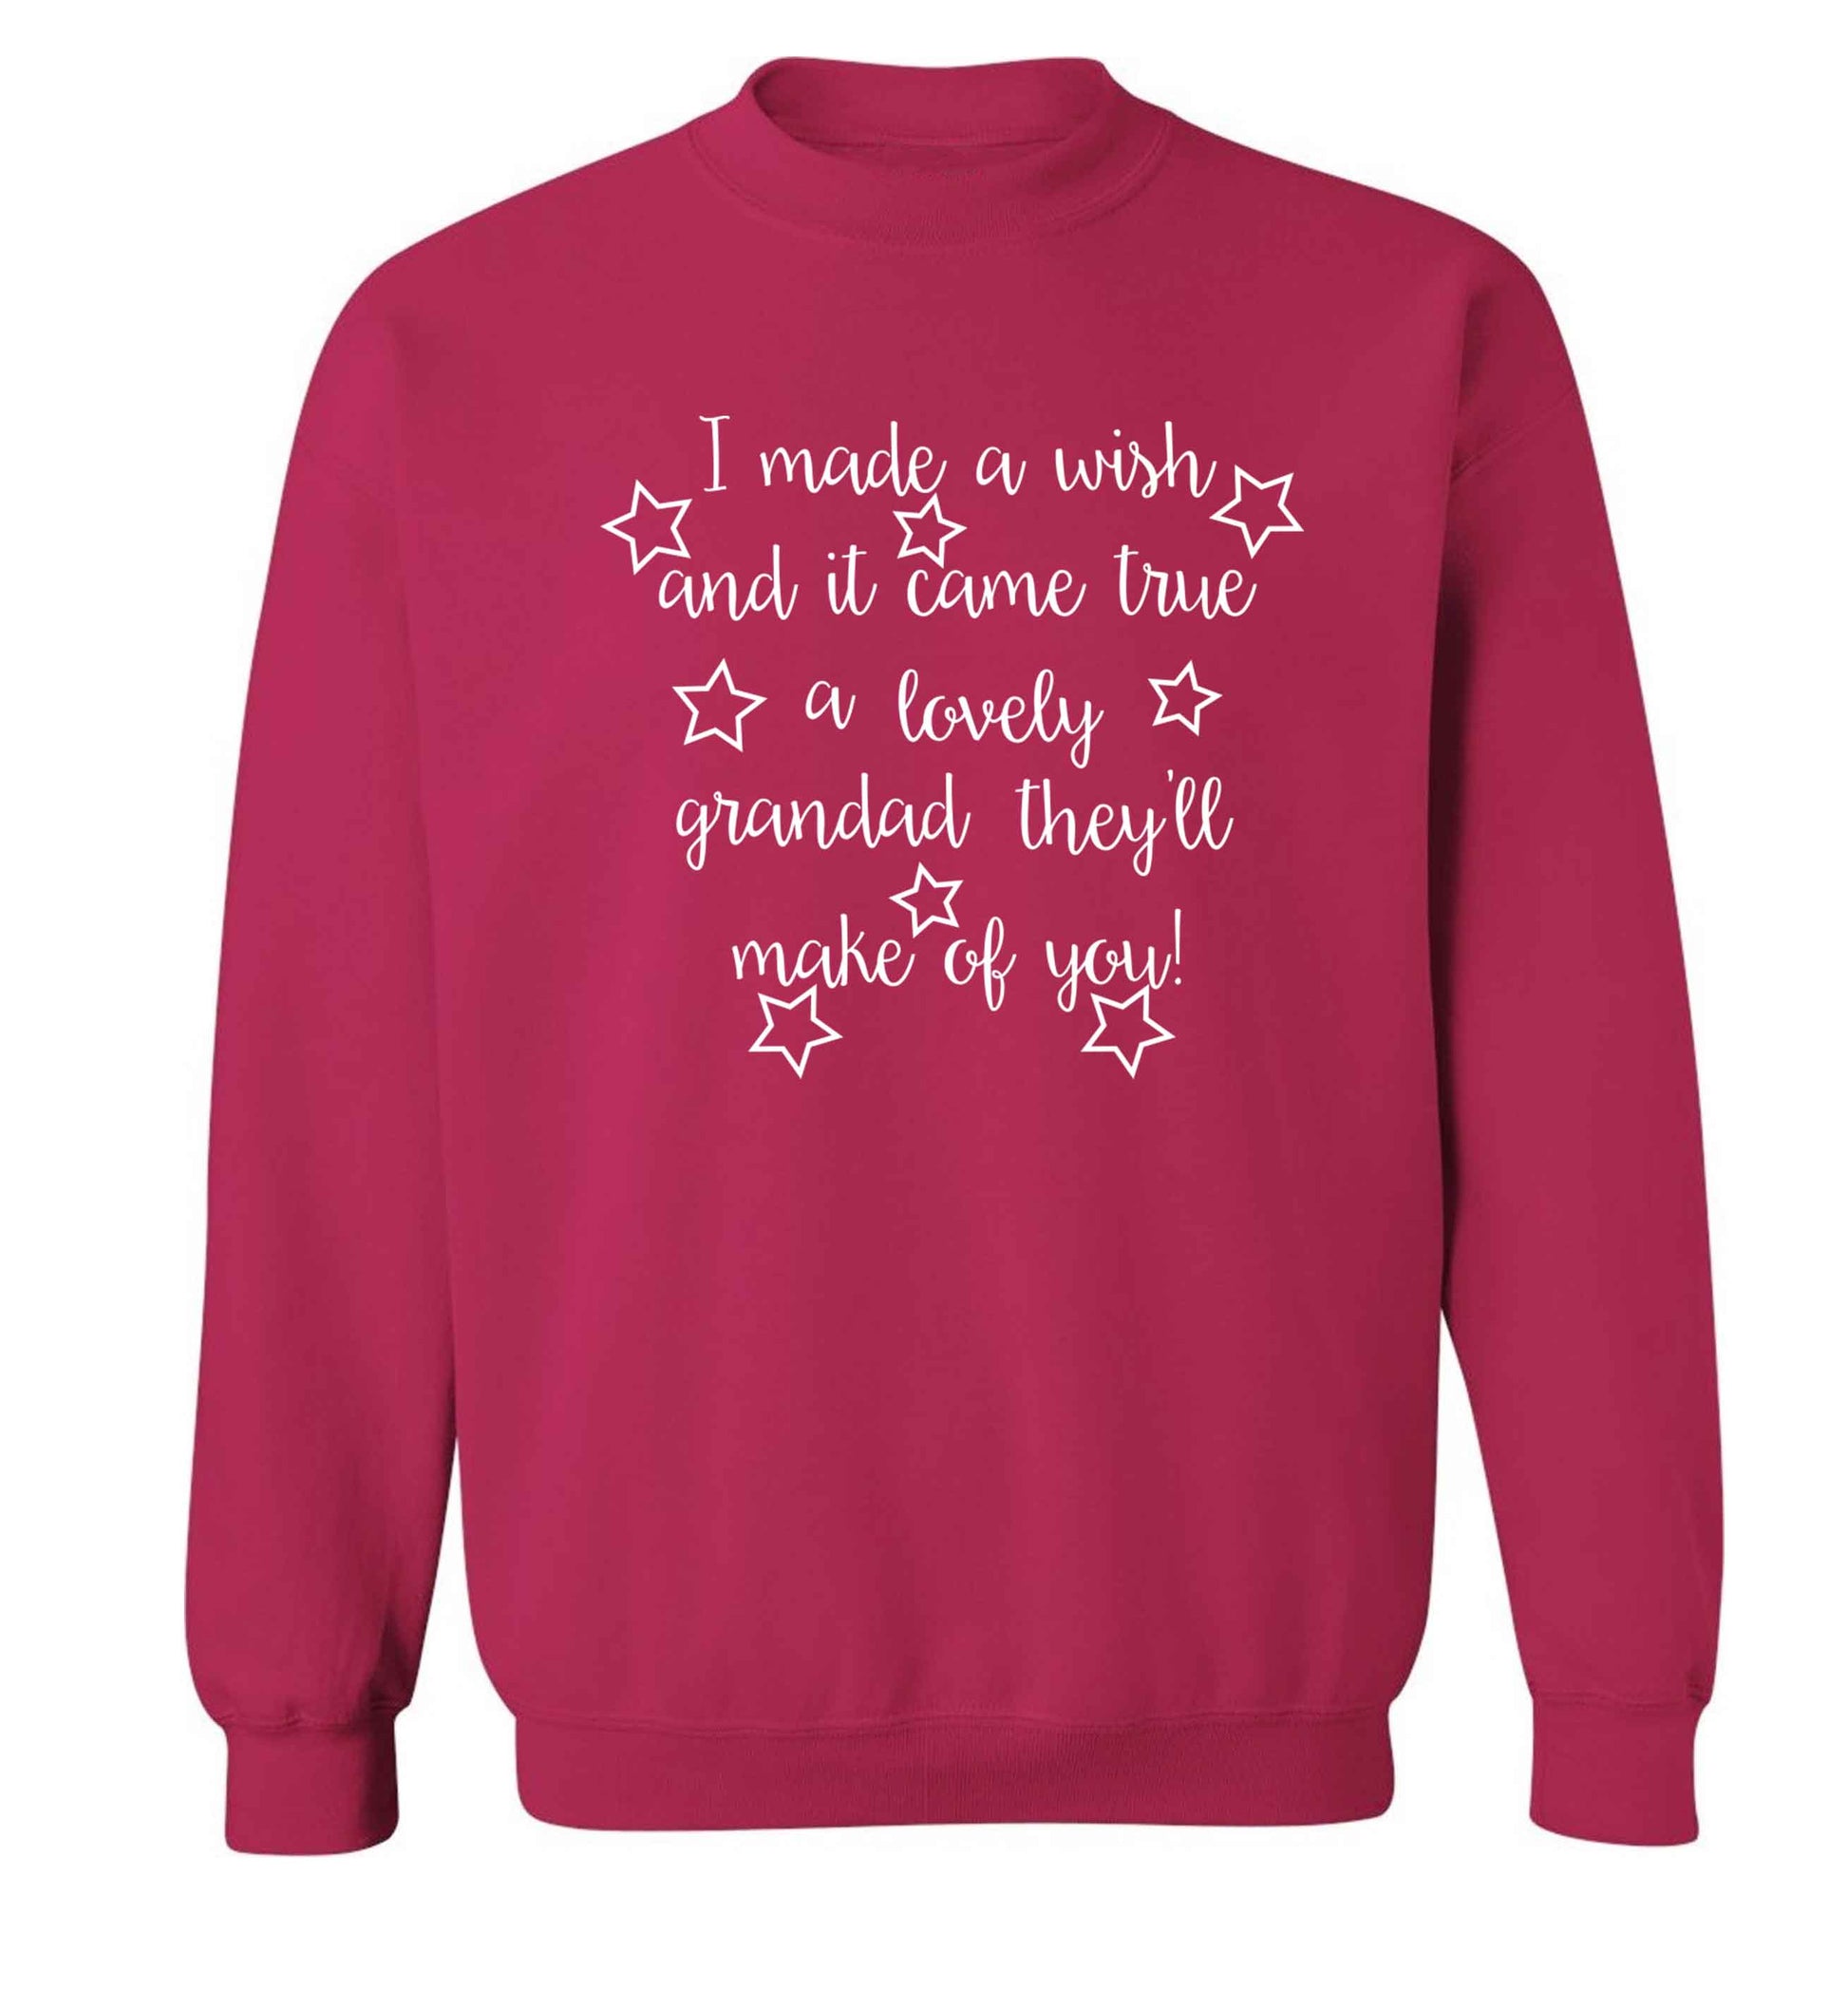 I made a wish and it came true a lovely grandad they'll make of you! Adult's unisex pink Sweater 2XL